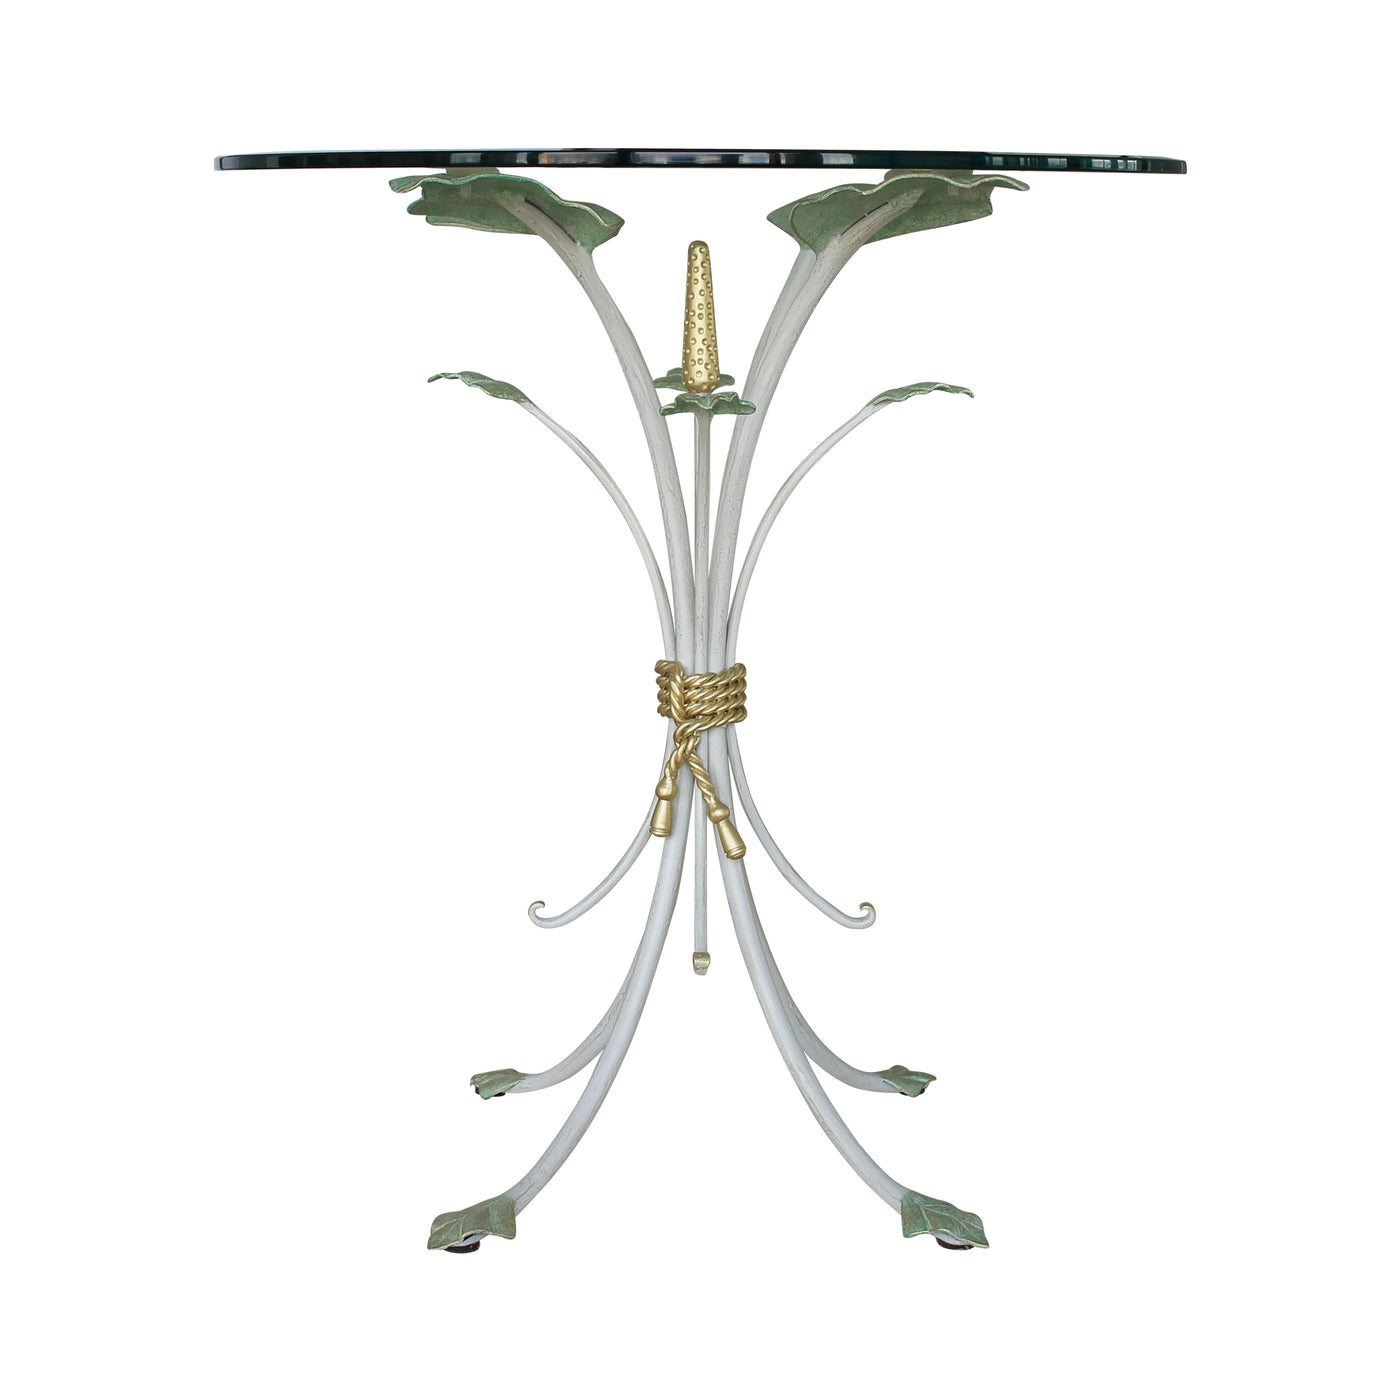 Frontal view of an eclectic end table inspired by nature